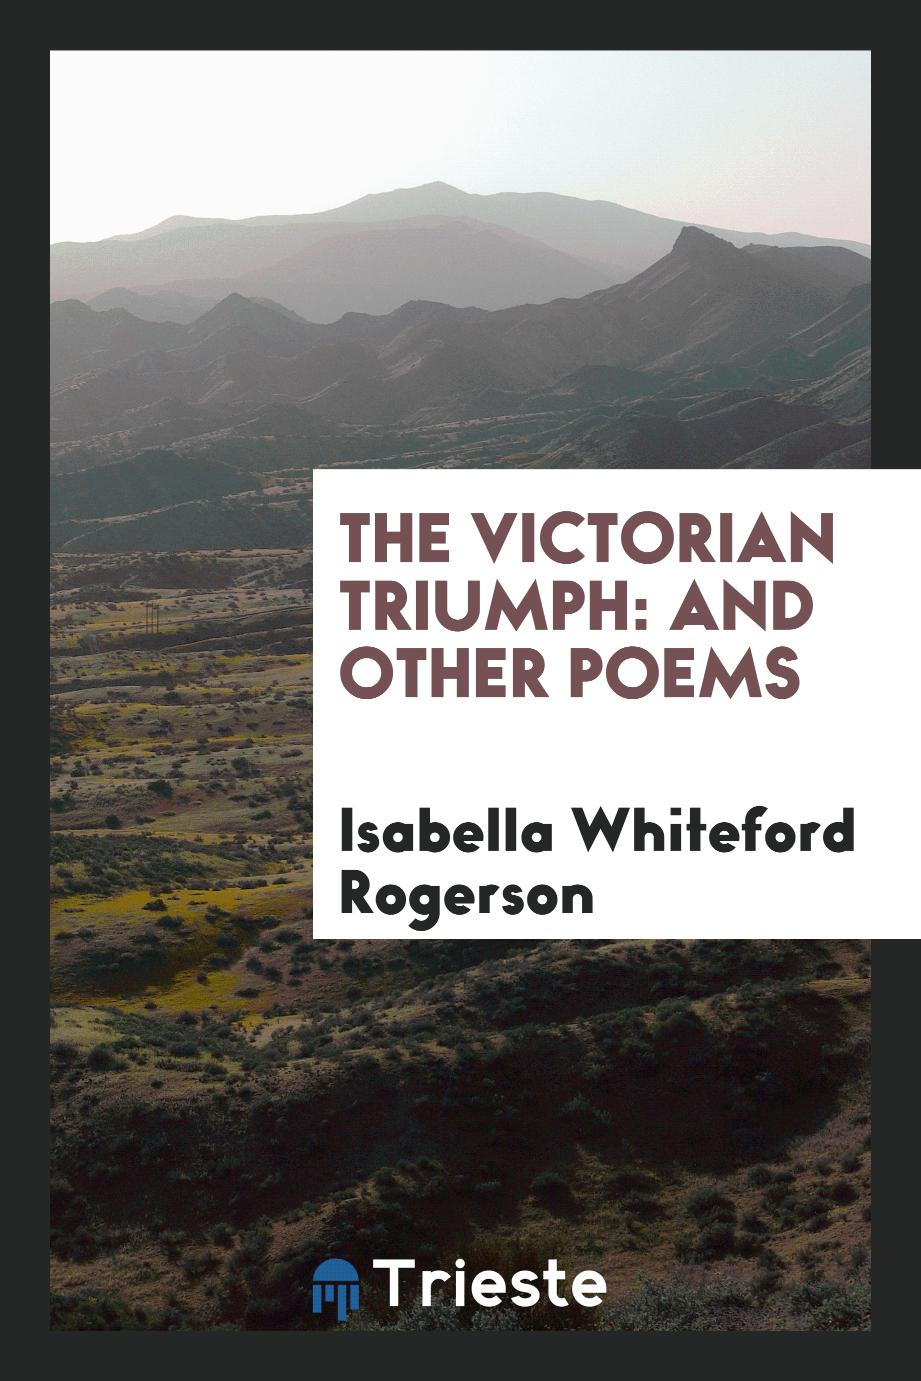 The Victorian Triumph: And Other Poems